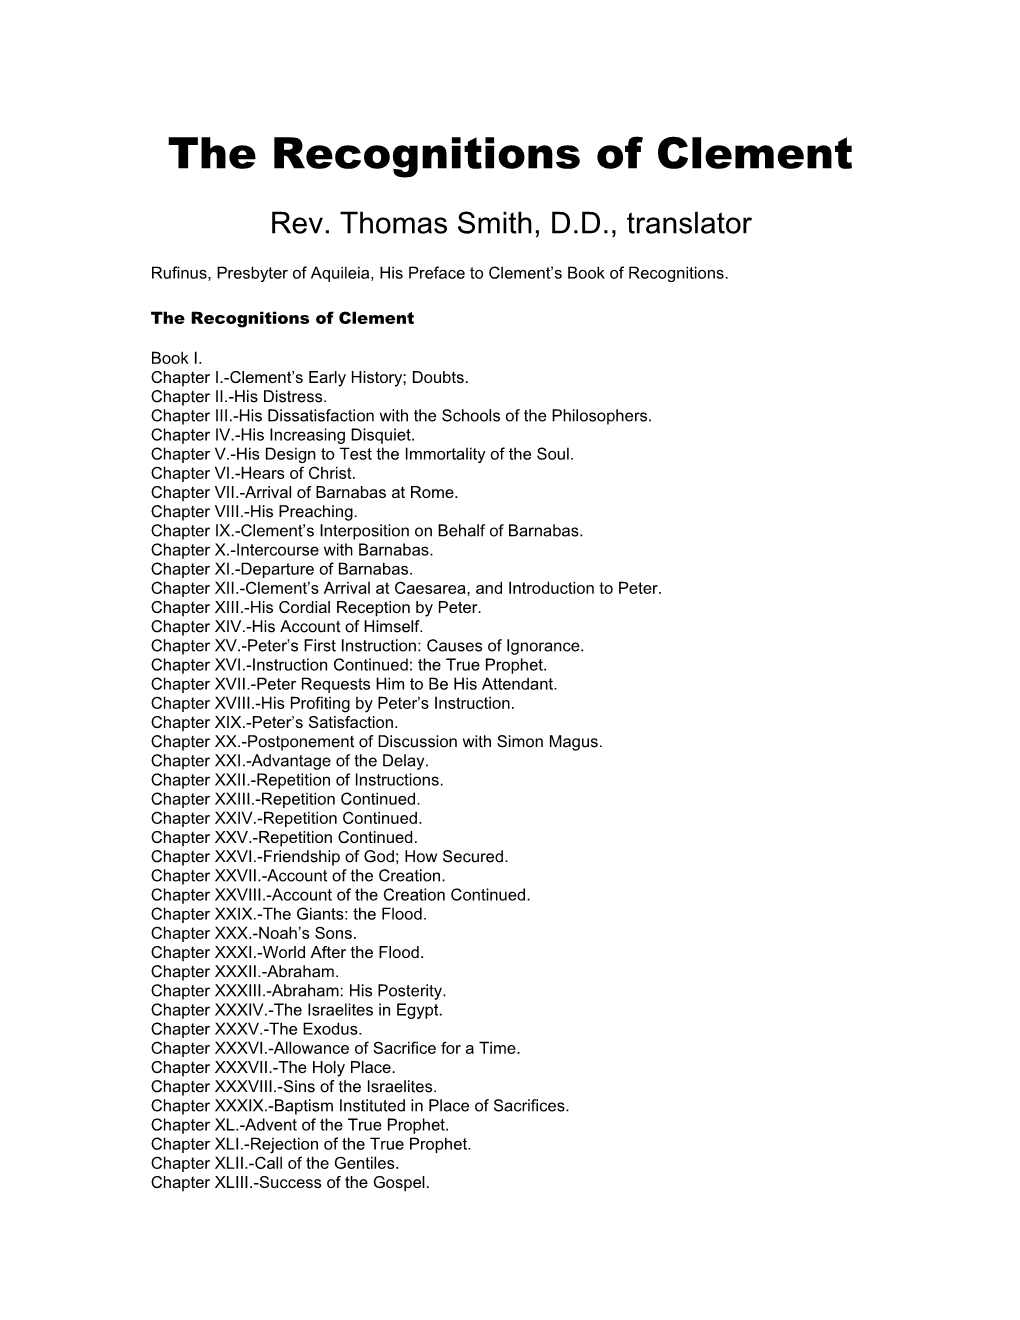 Introductory Notice to the Recognitions of Clement